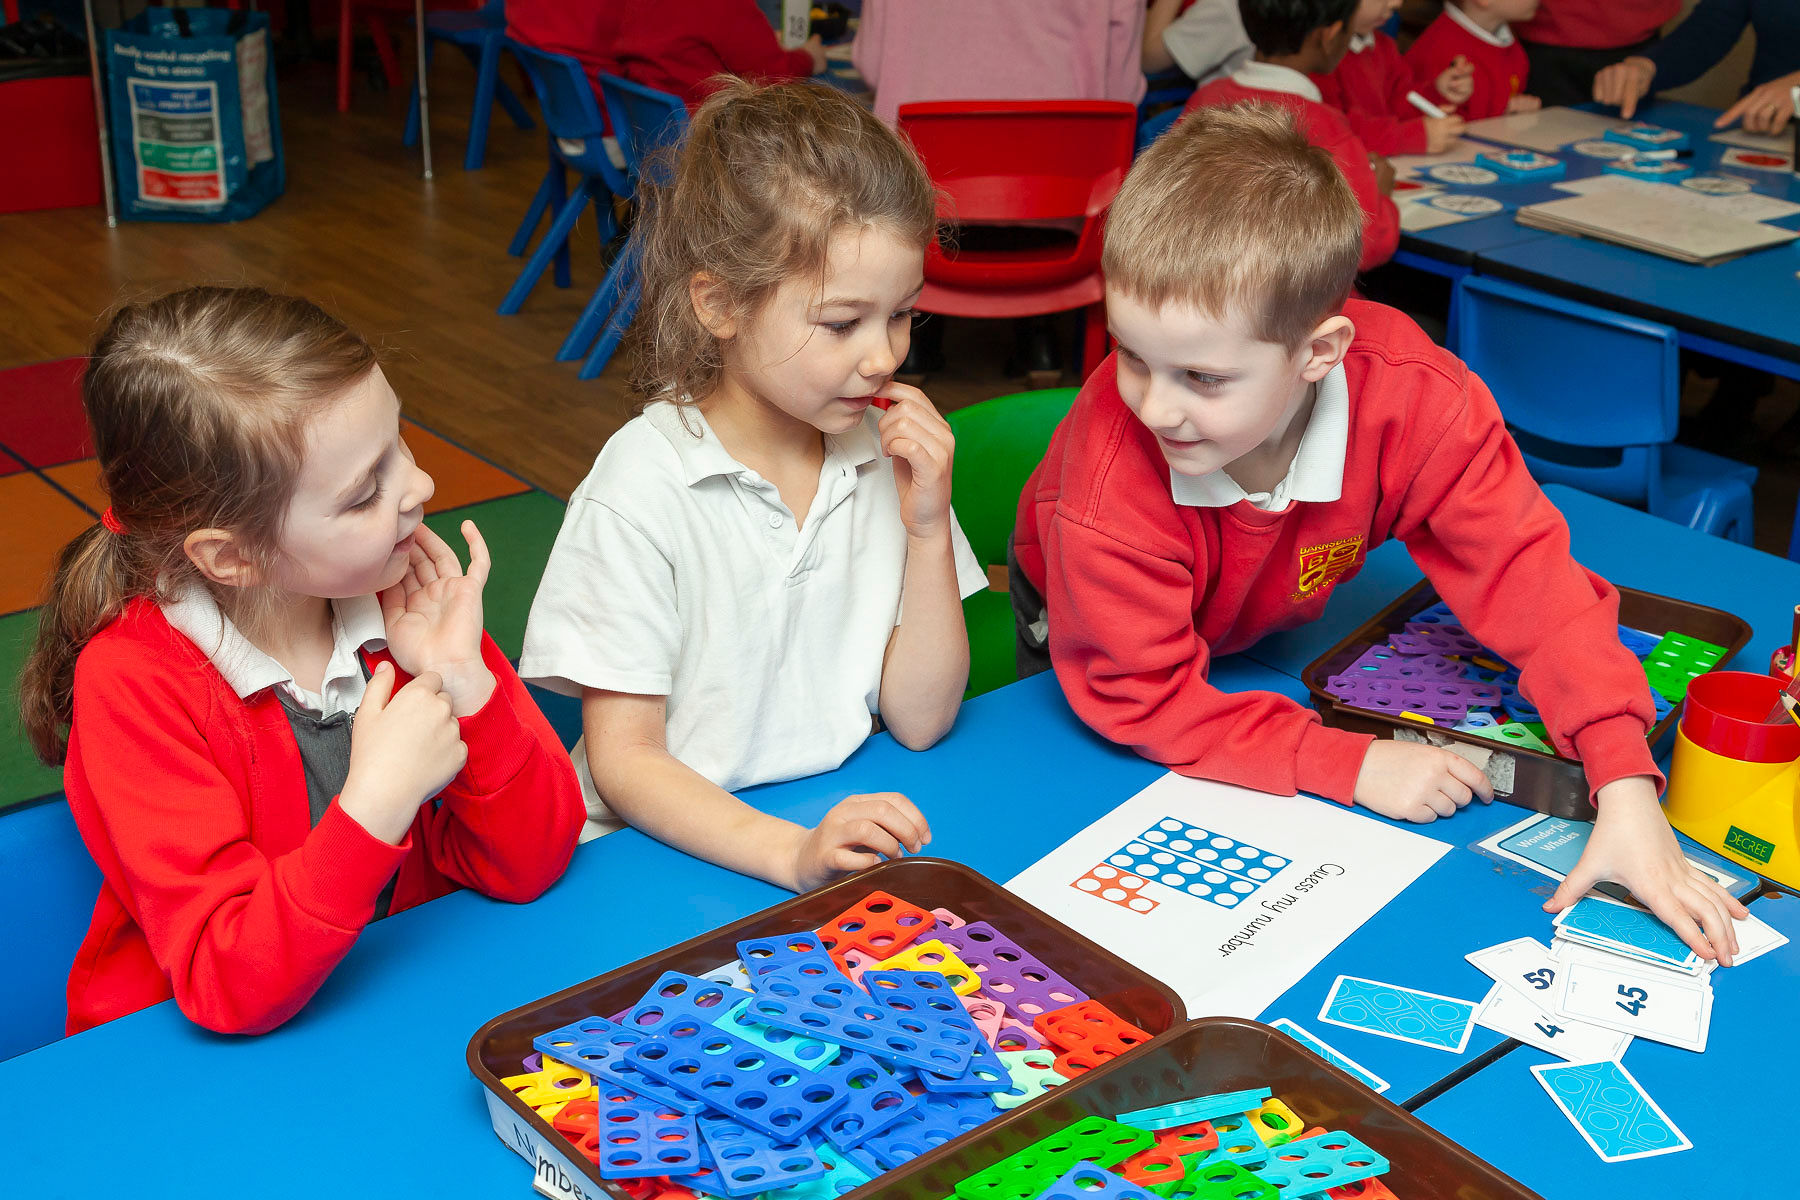 Children solving primary maths problems with Numicon apparatus